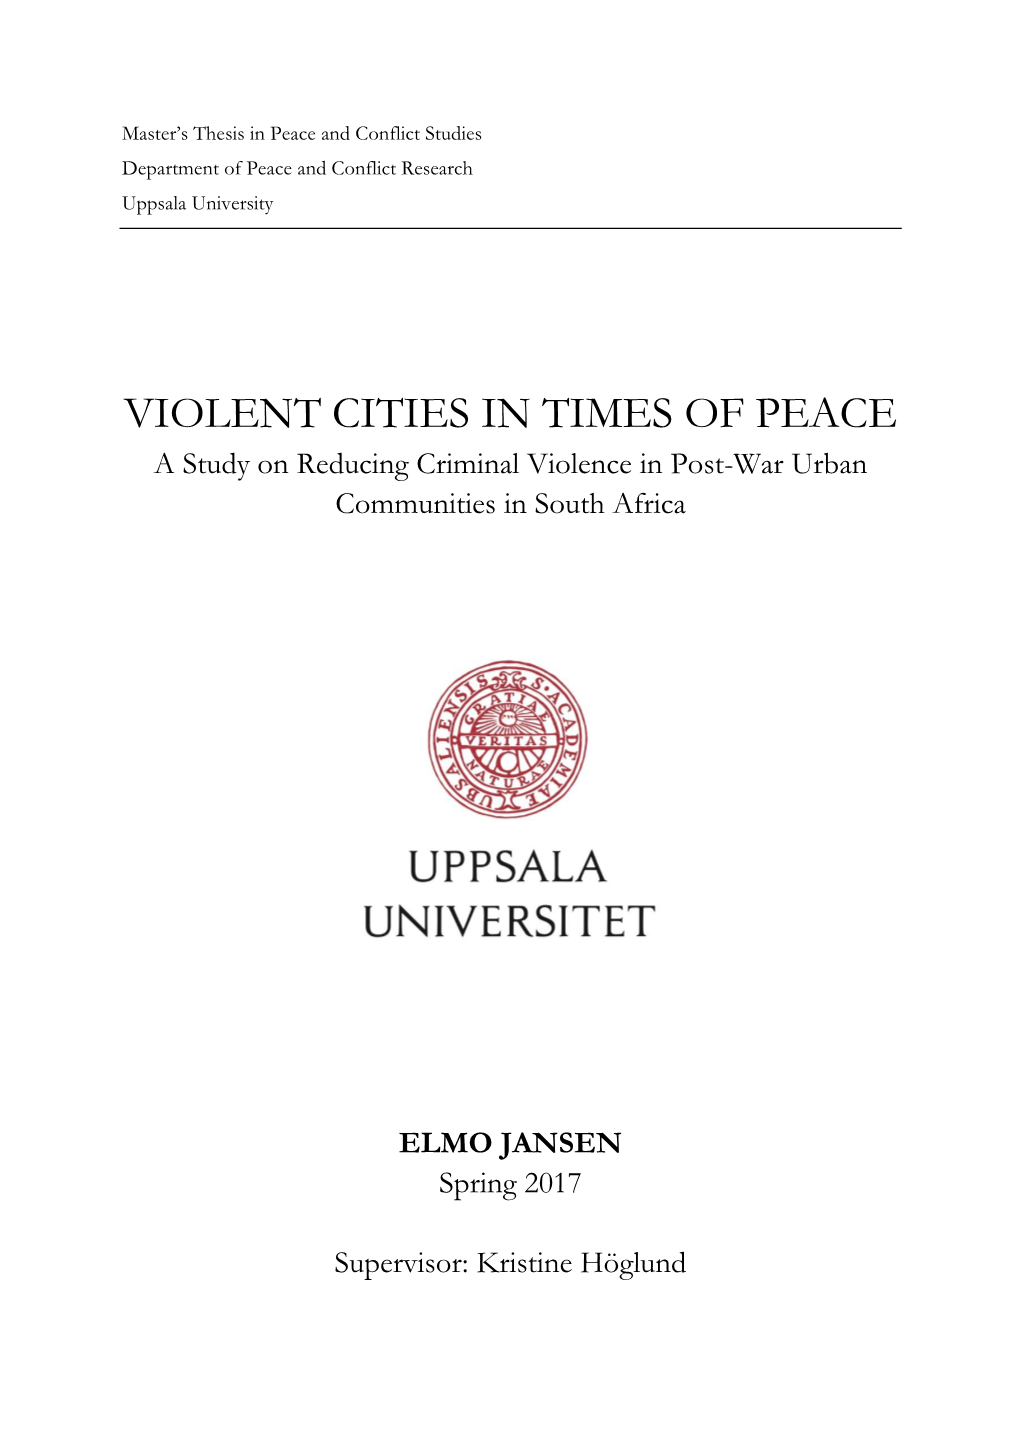 VIOLENT CITIES in TIMES of PEACE a Study on Reducing Criminal Violence in Post-War Urban Communities in South Africa